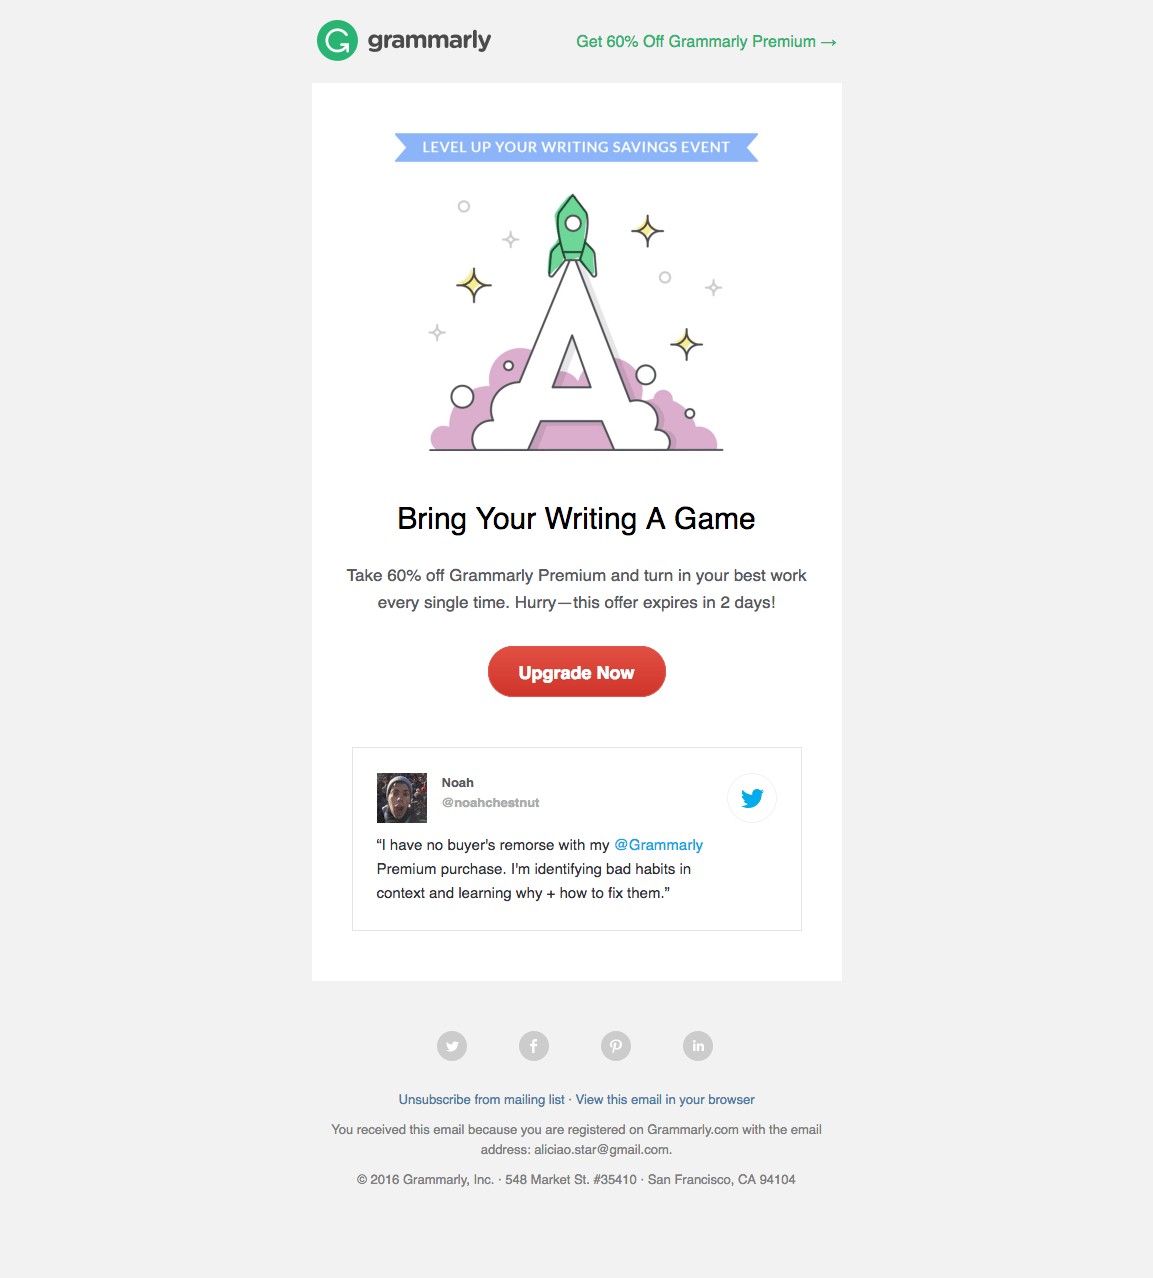 grammarly level up your writing email b2b best practices lead generation